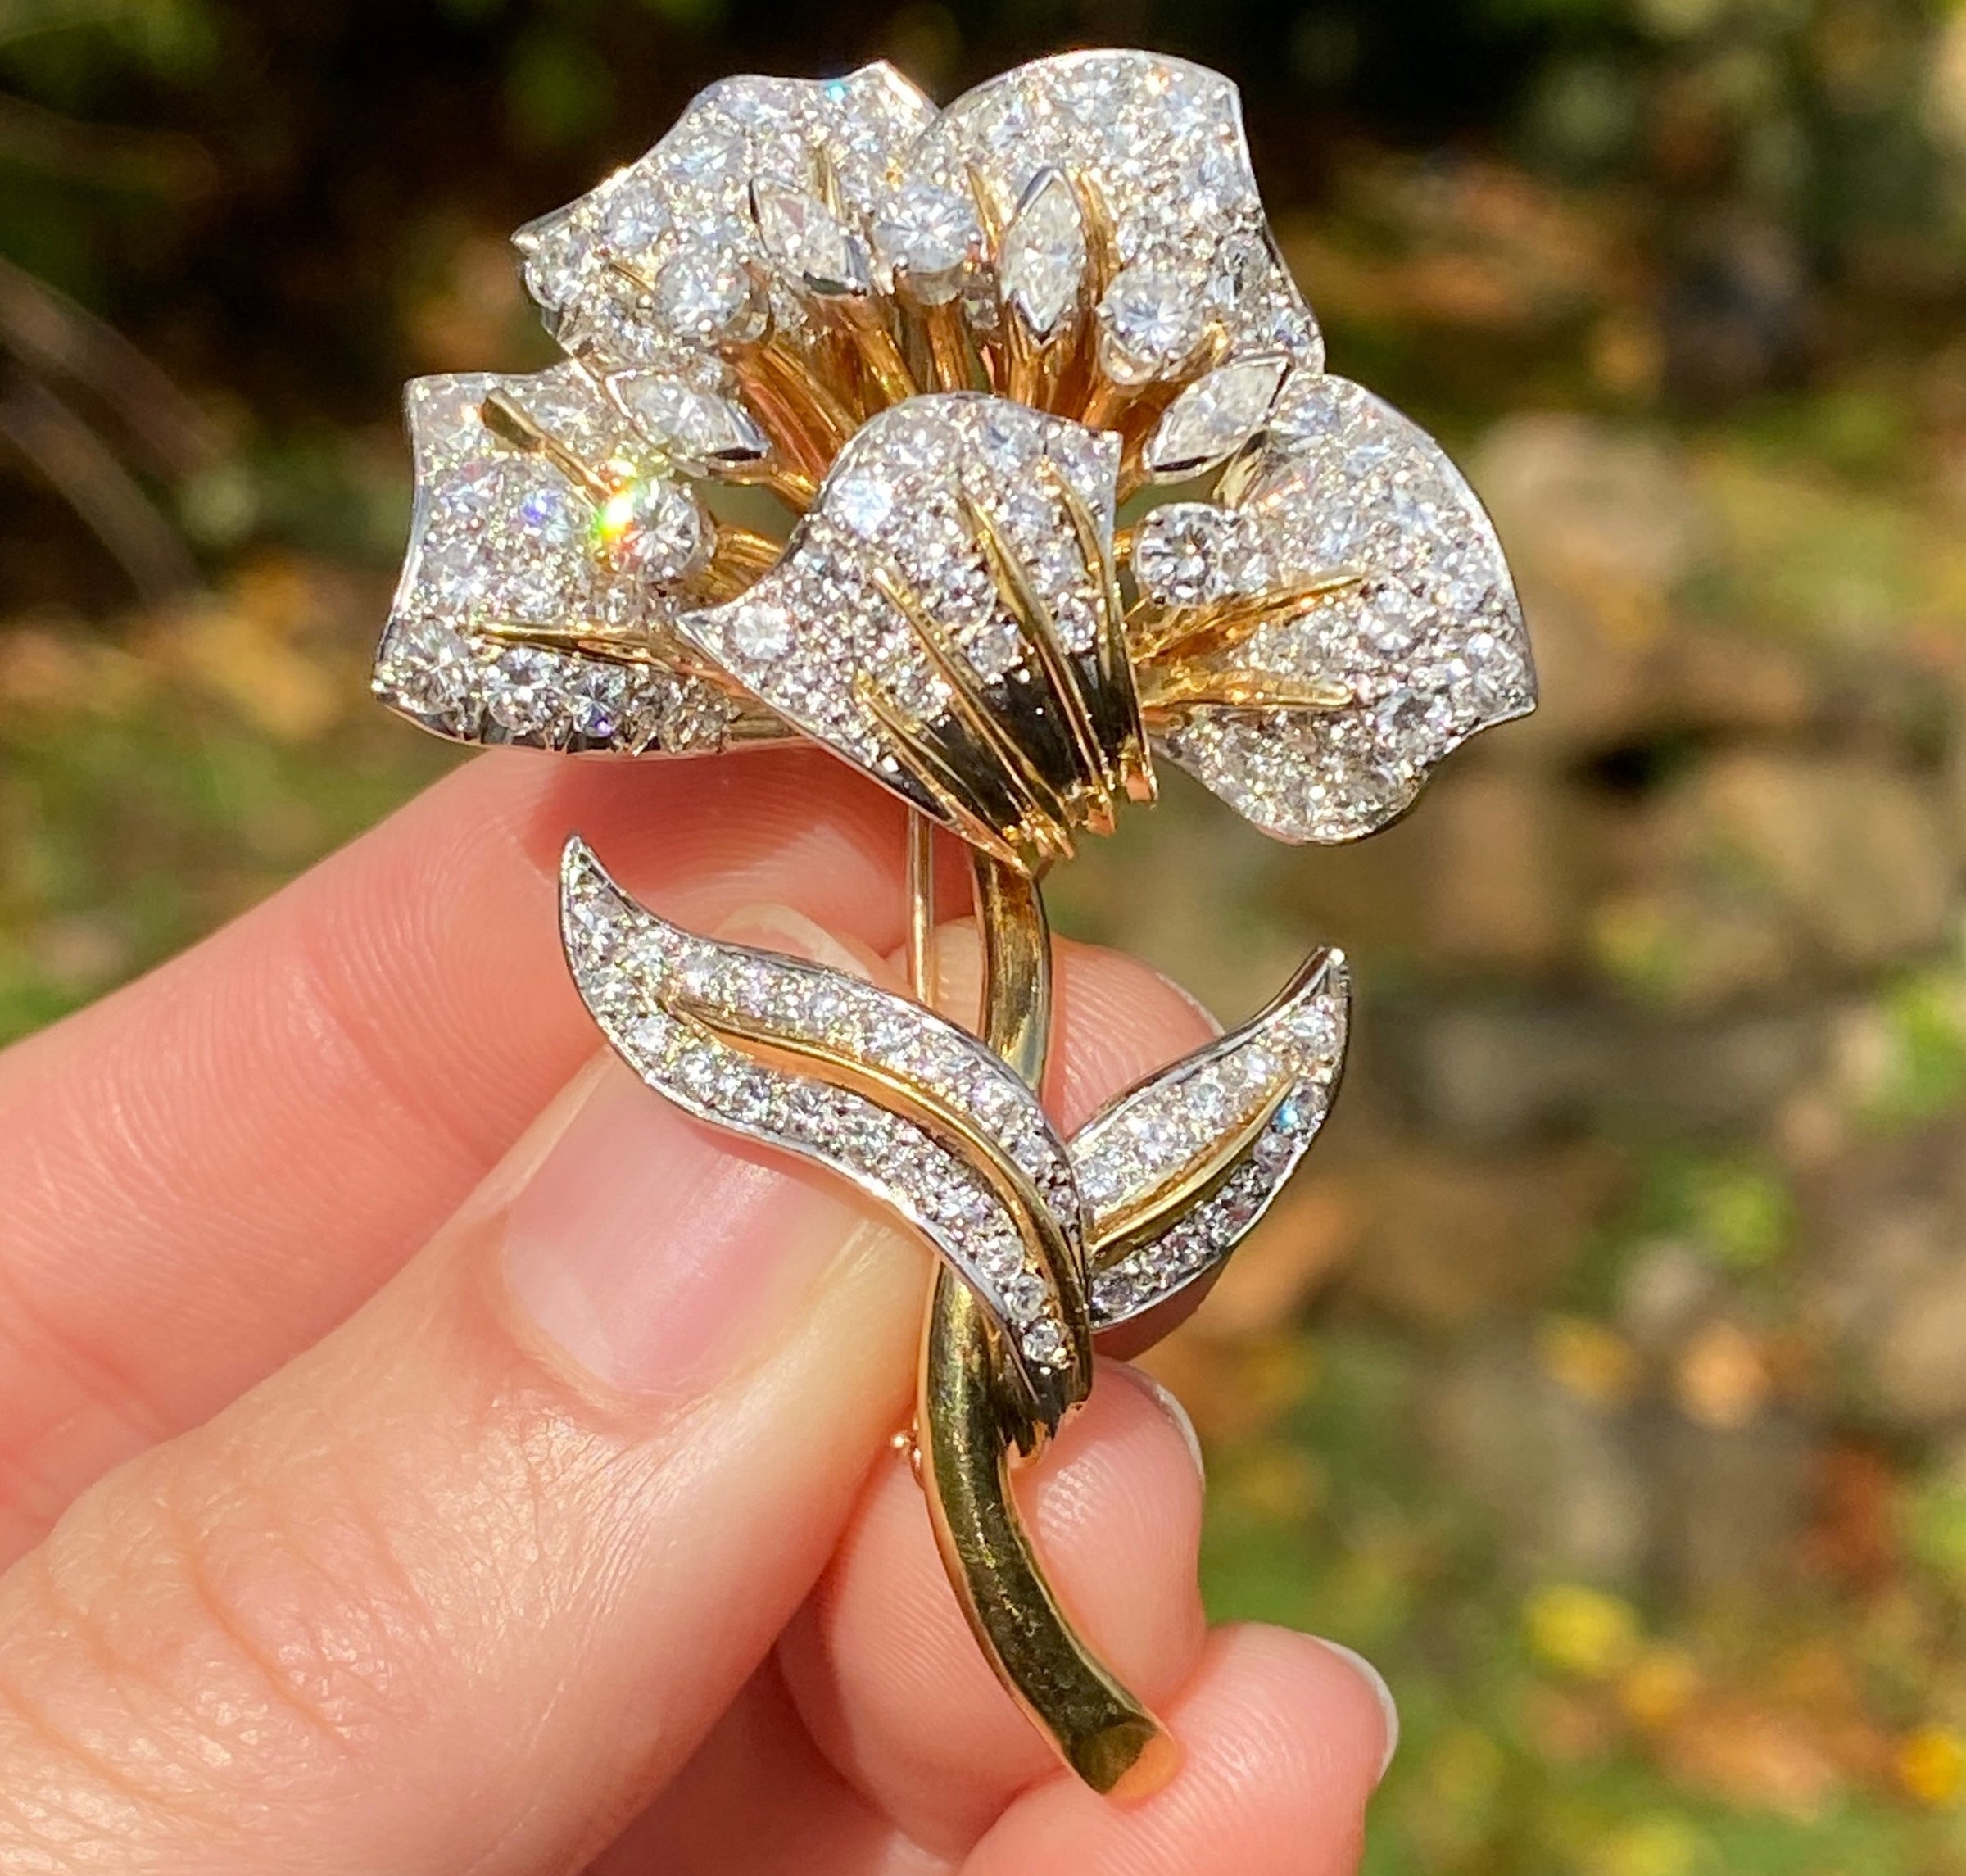 where can i find diamond pins for flowers｜TikTok Search